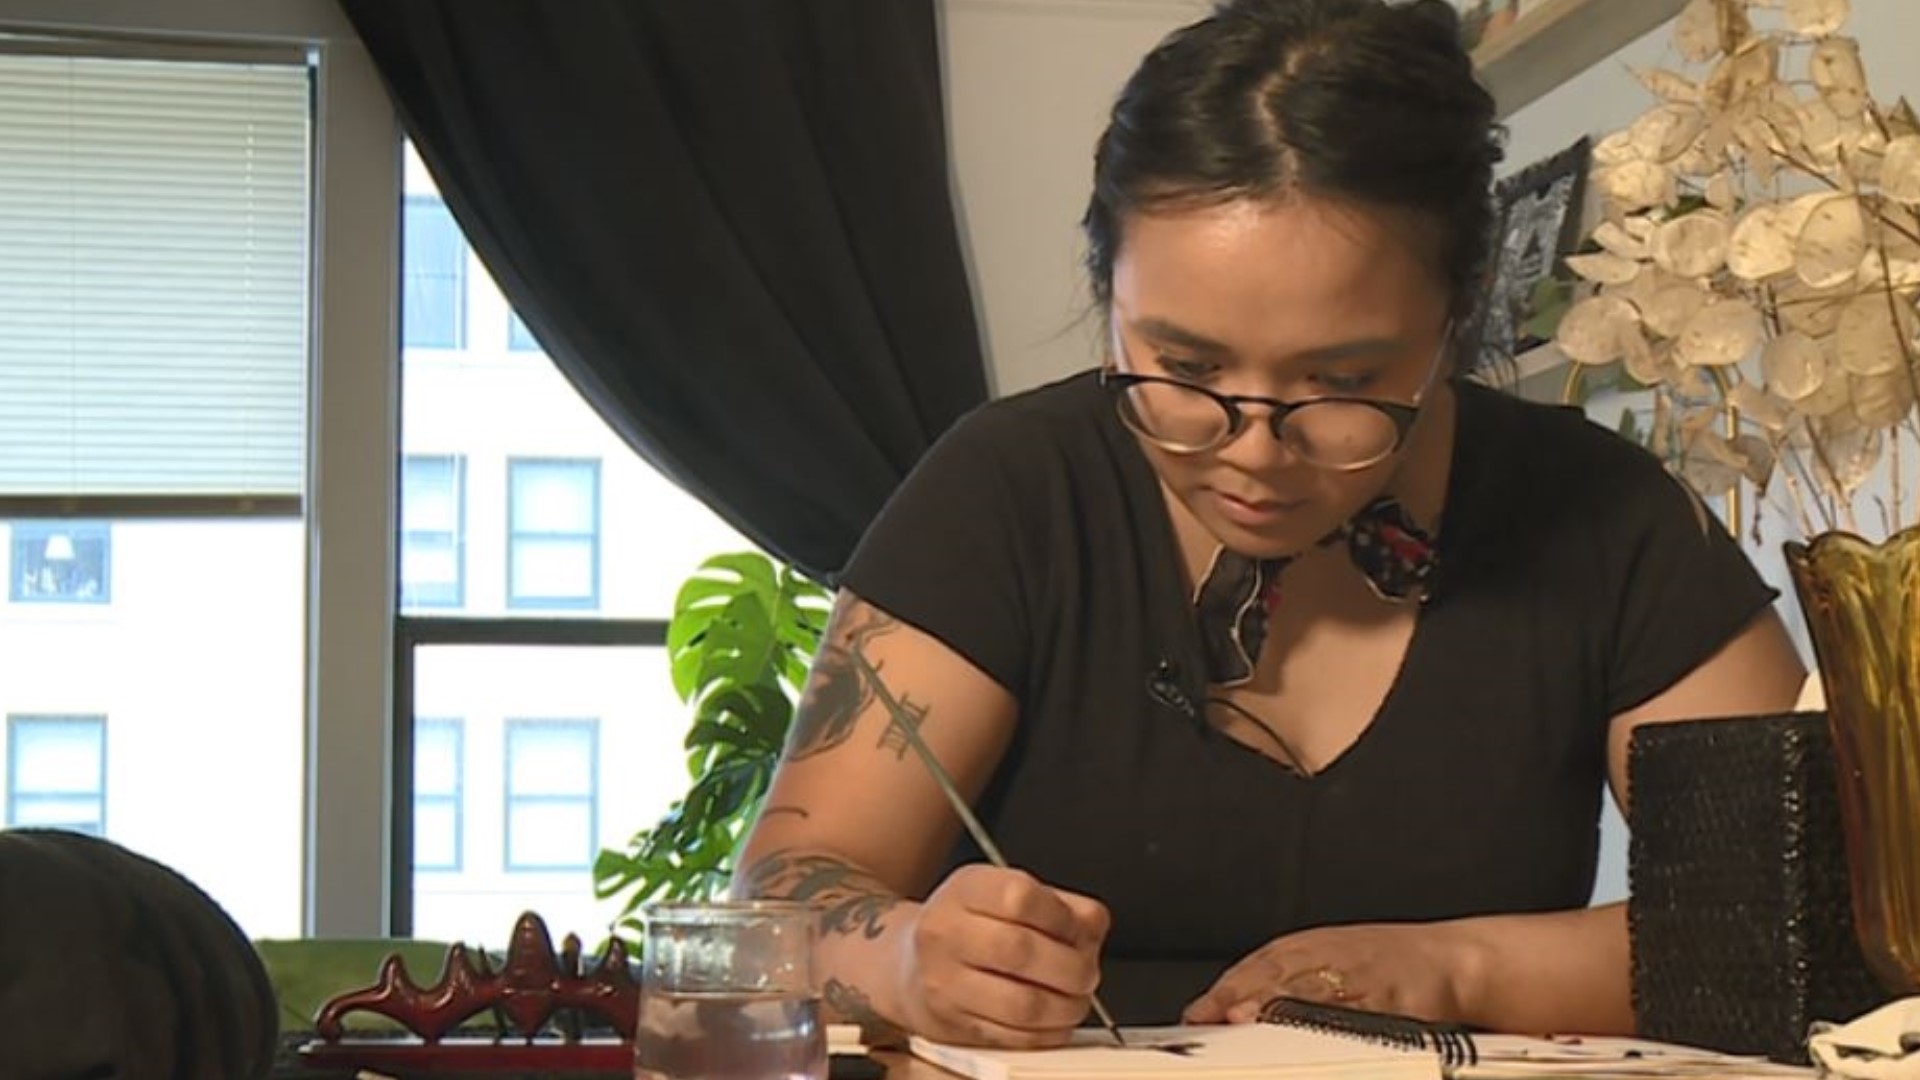 Teased for bringing her favorite Filipino food to school, author celebrates her heritage in children's book. #k5evening